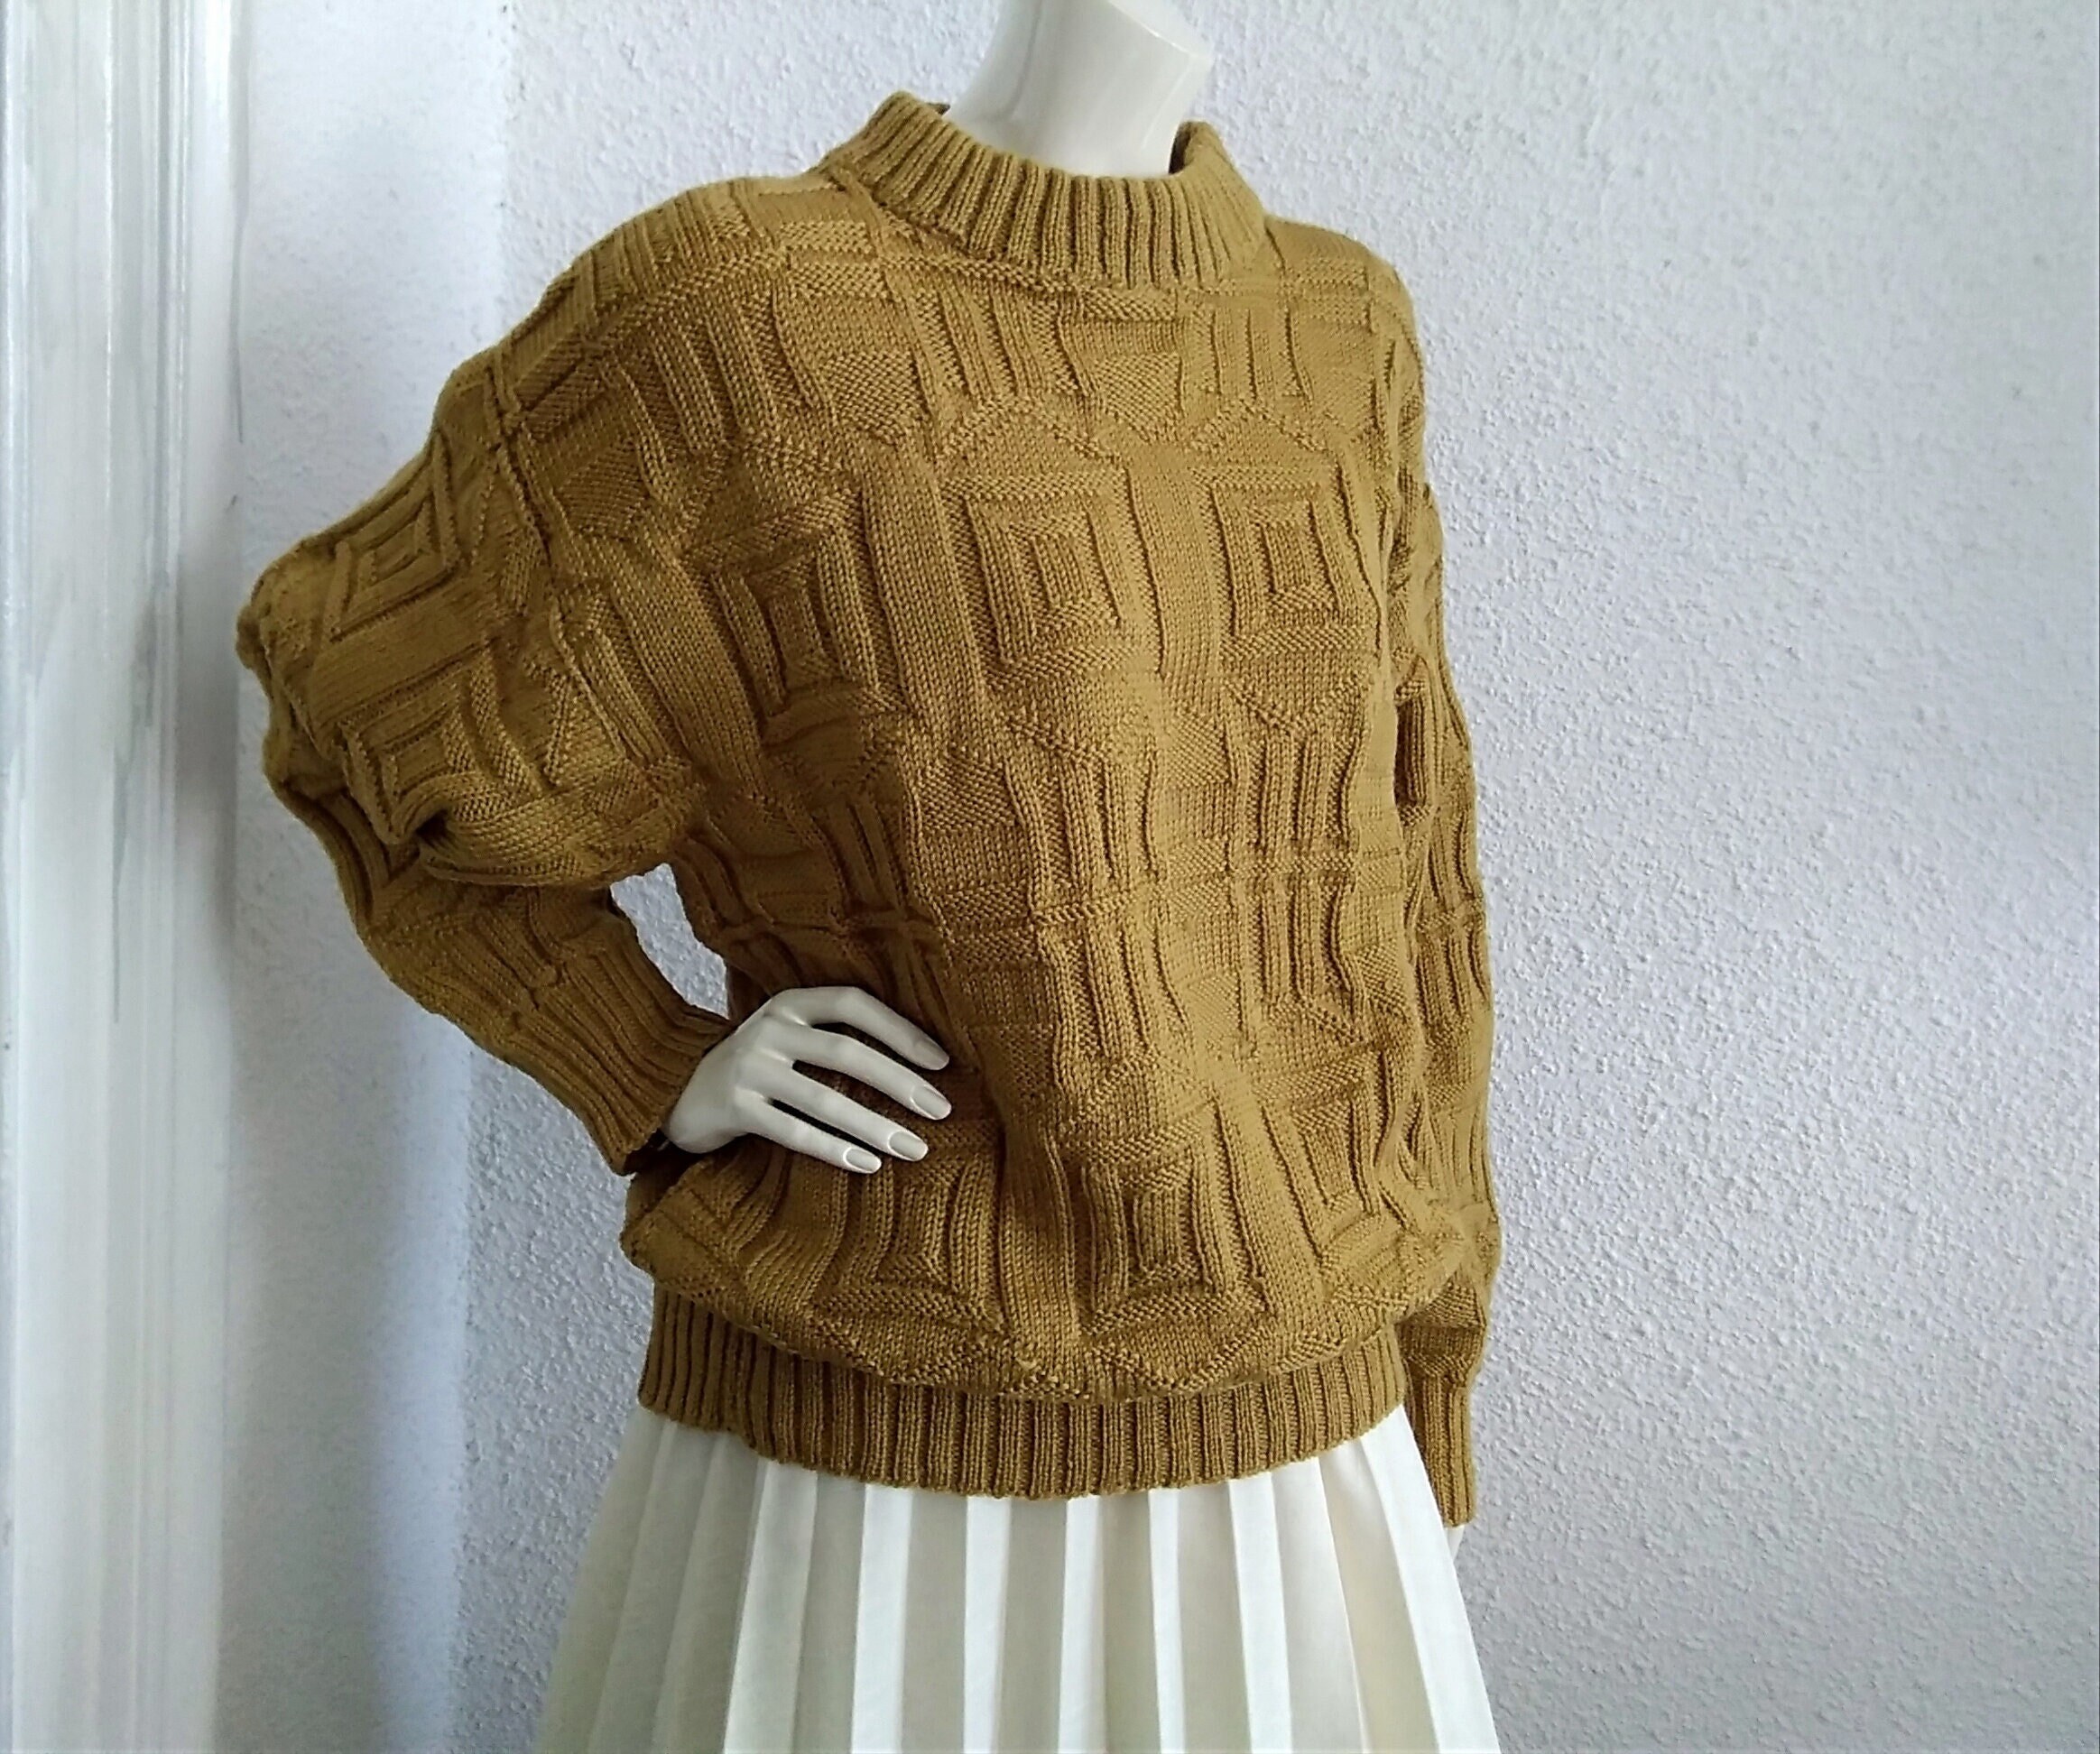 80s Handknitted Sweater Fisherman Aran Style Jumper Probably